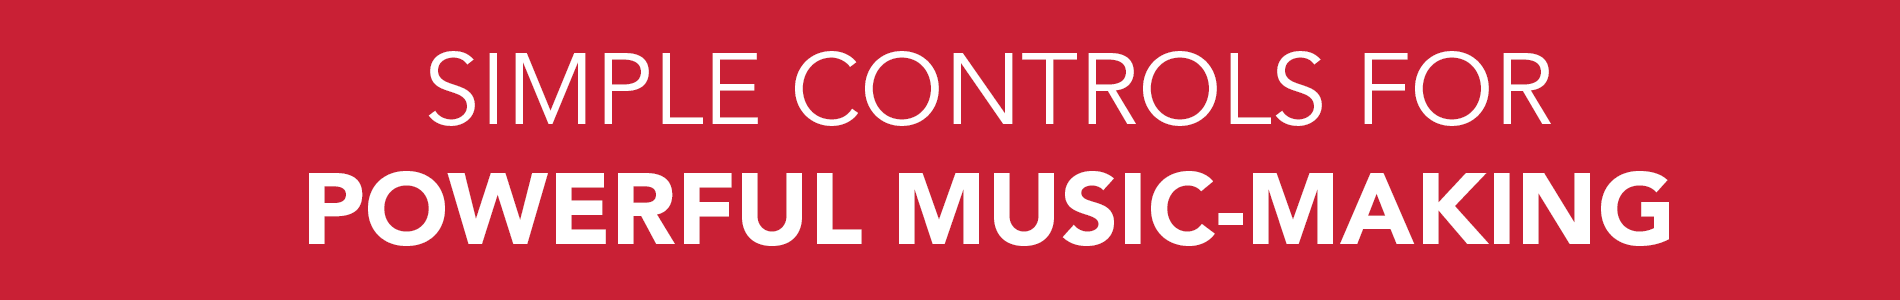 Simple Controls For Powerful Music-Making